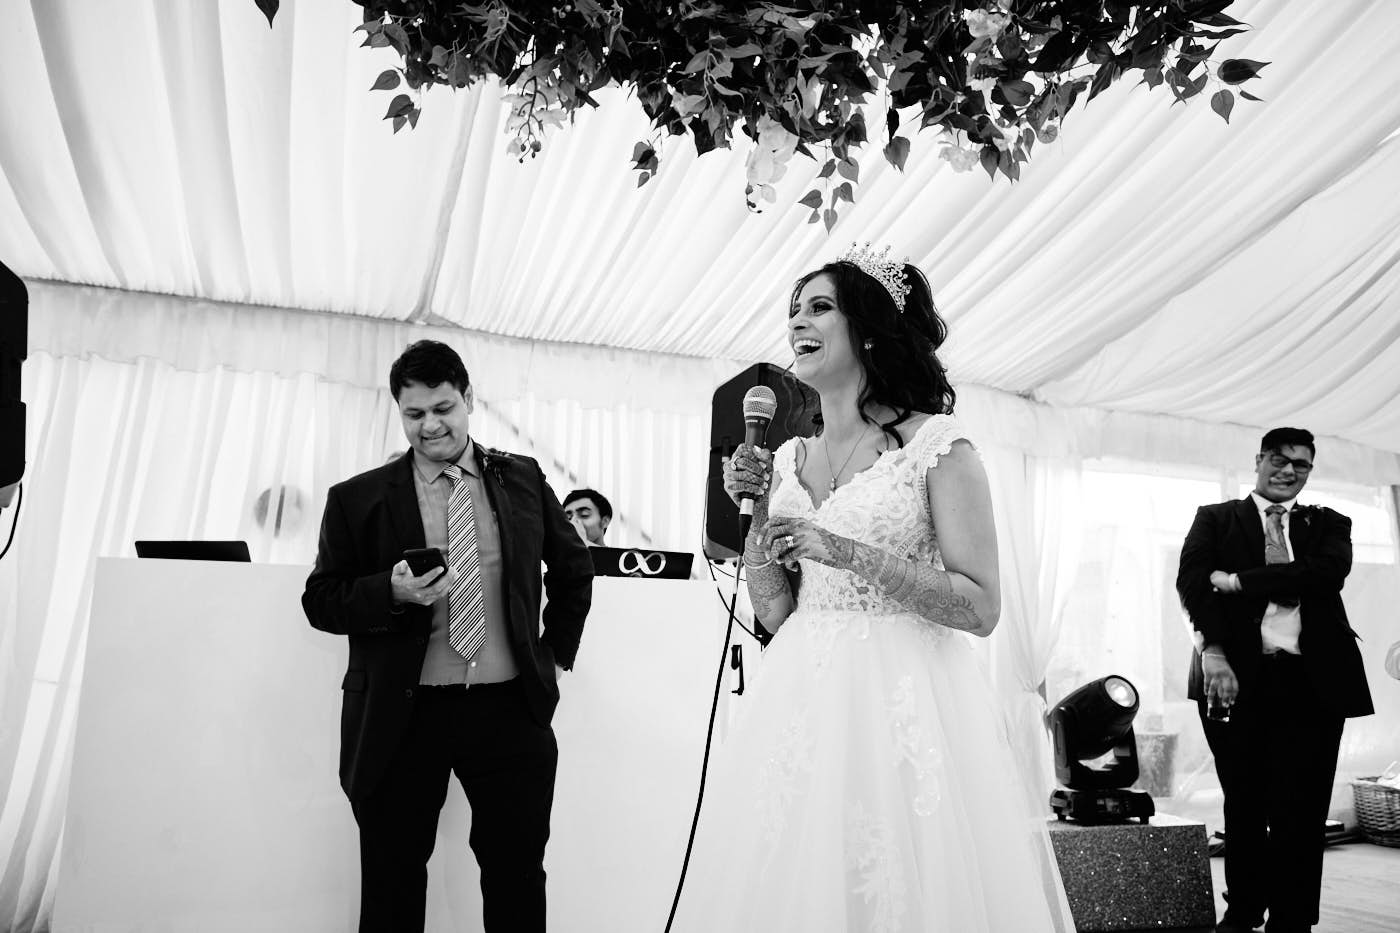 Wedding speeches for women given by bride